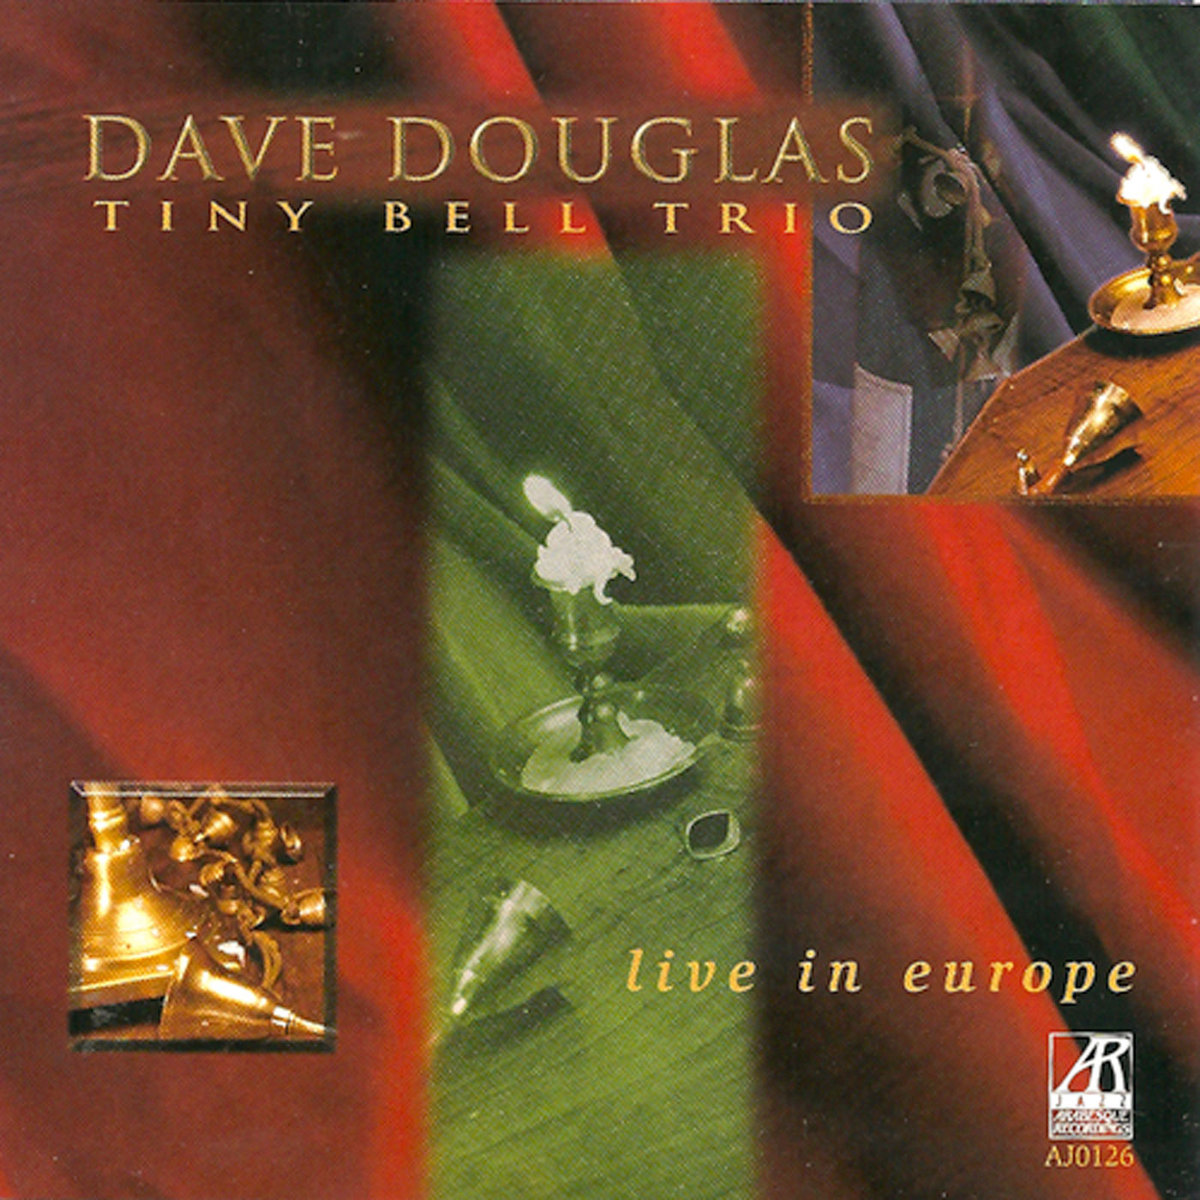 Tiny Bell Trio - 'Live in Europe'